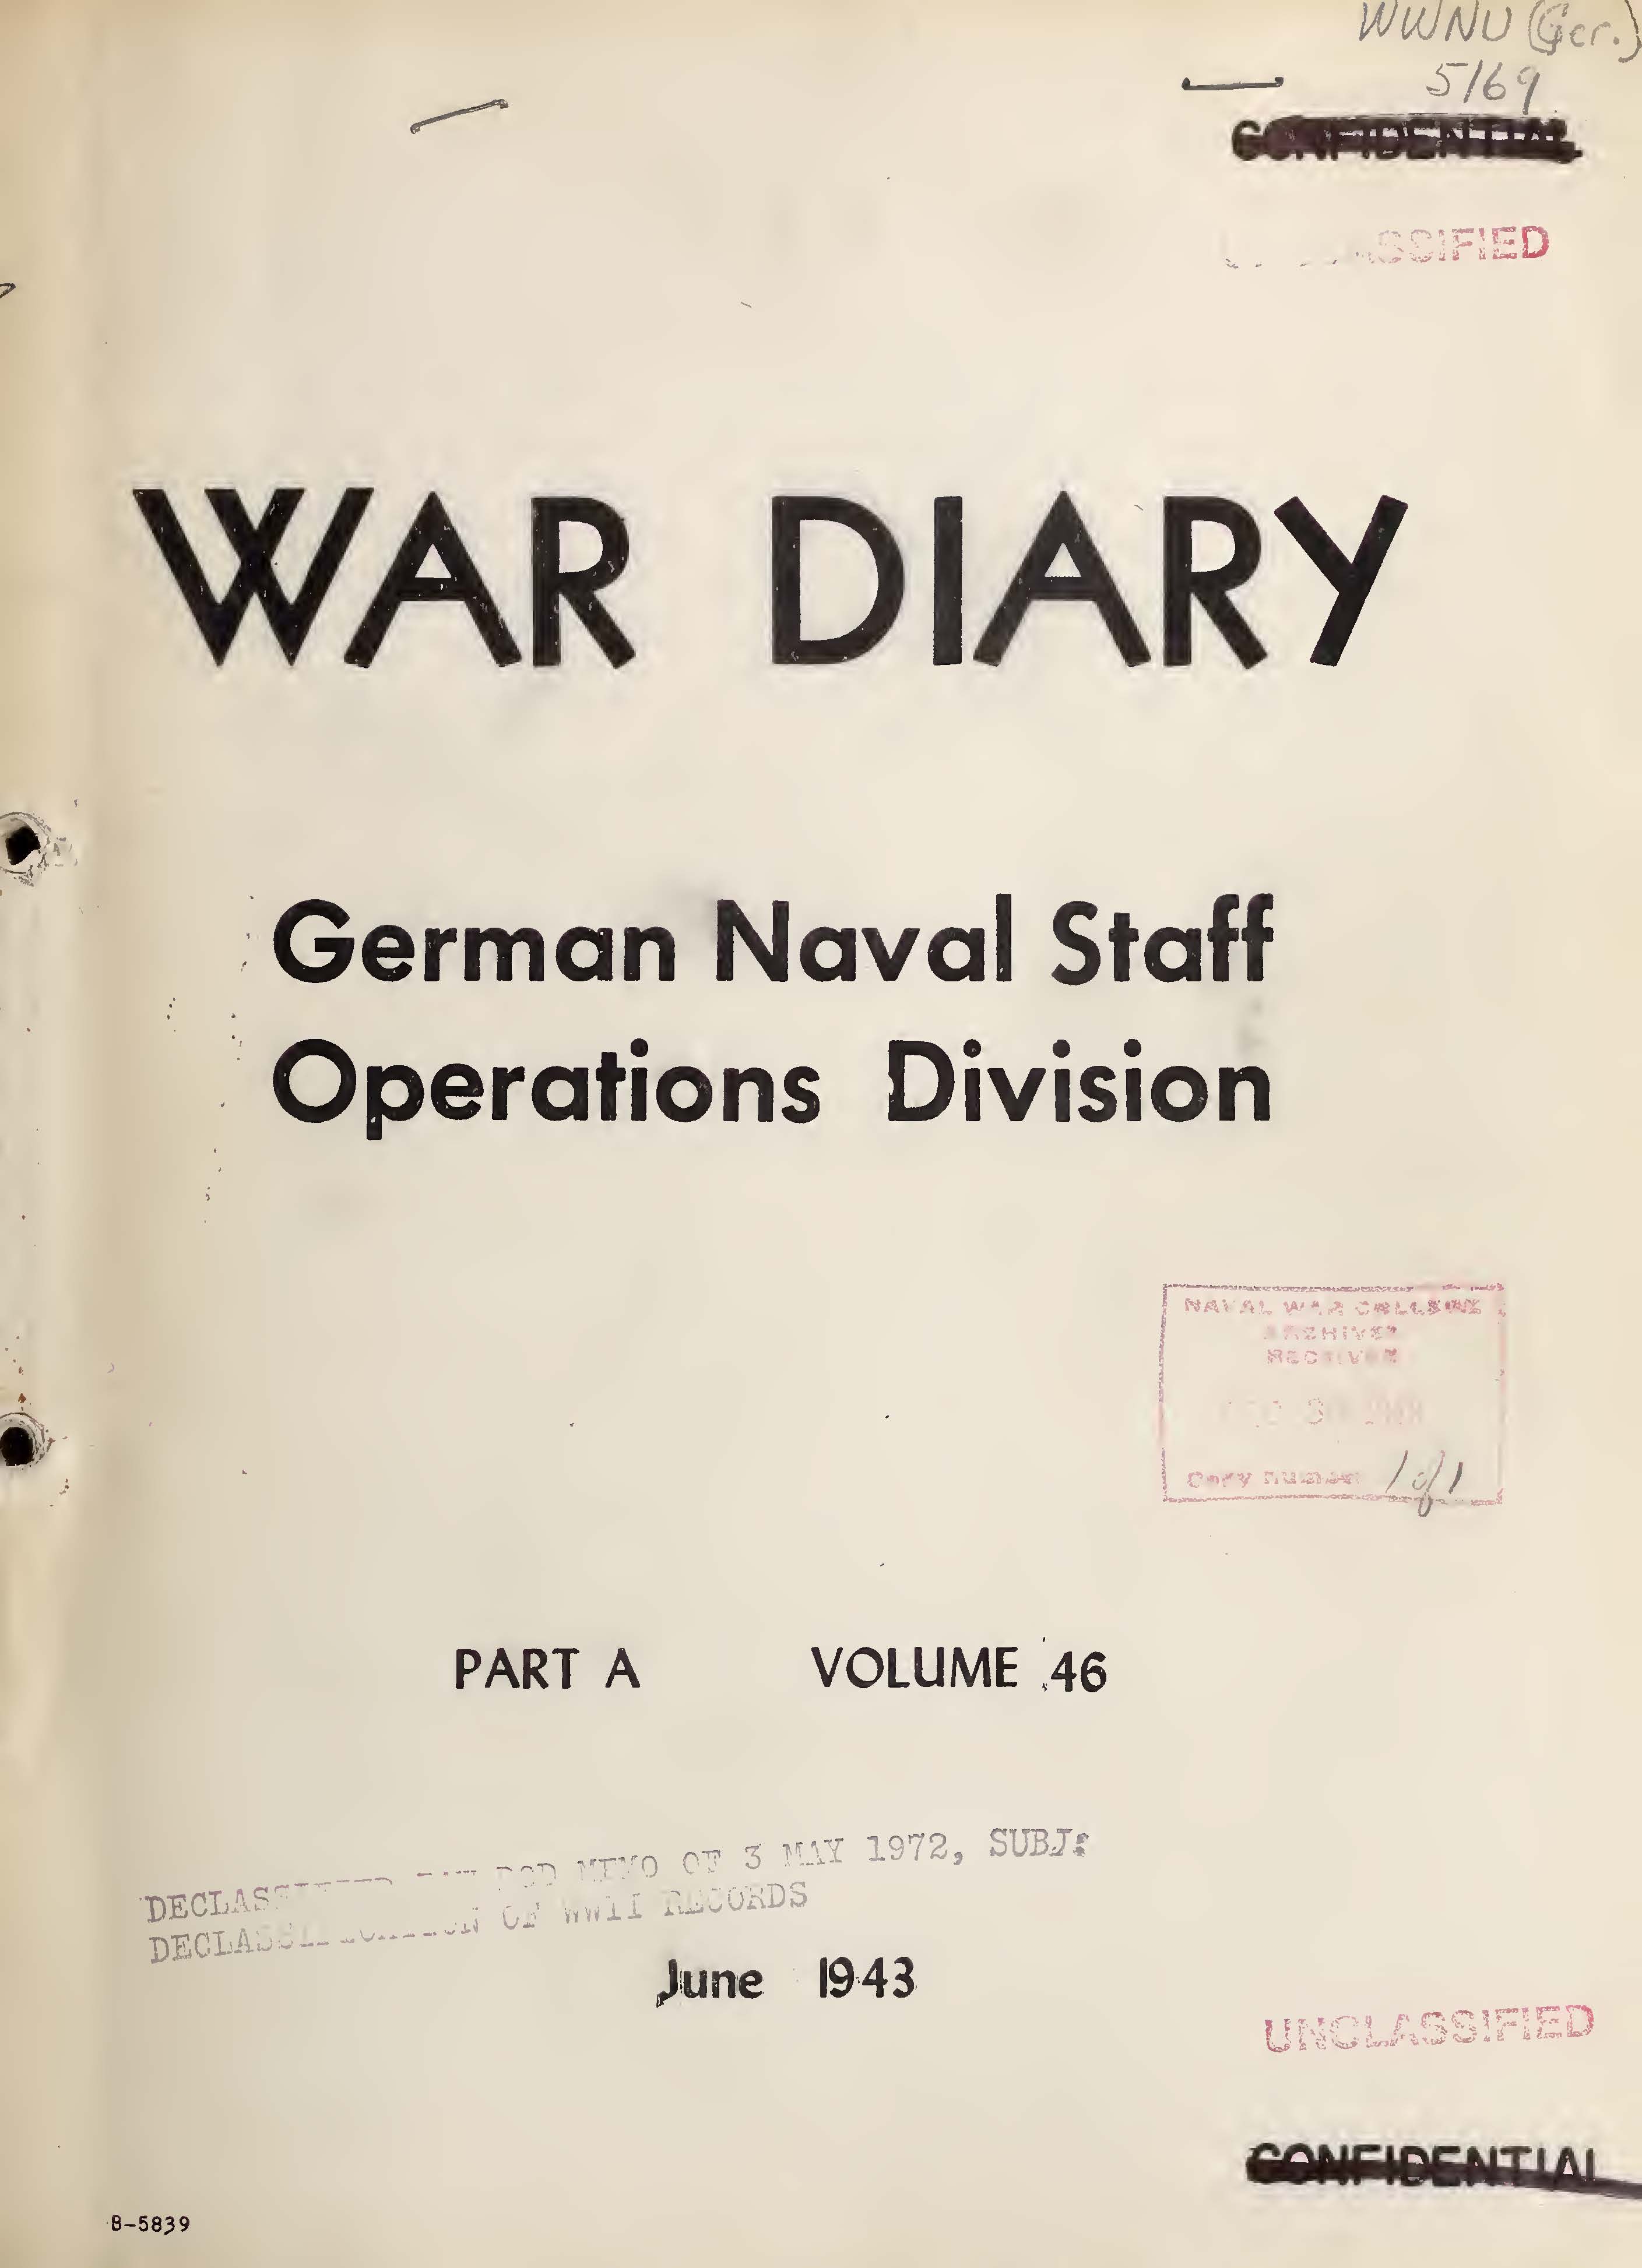 War Diary of German Naval Staff (Operations Division) Part A, Volume 46, June 1943